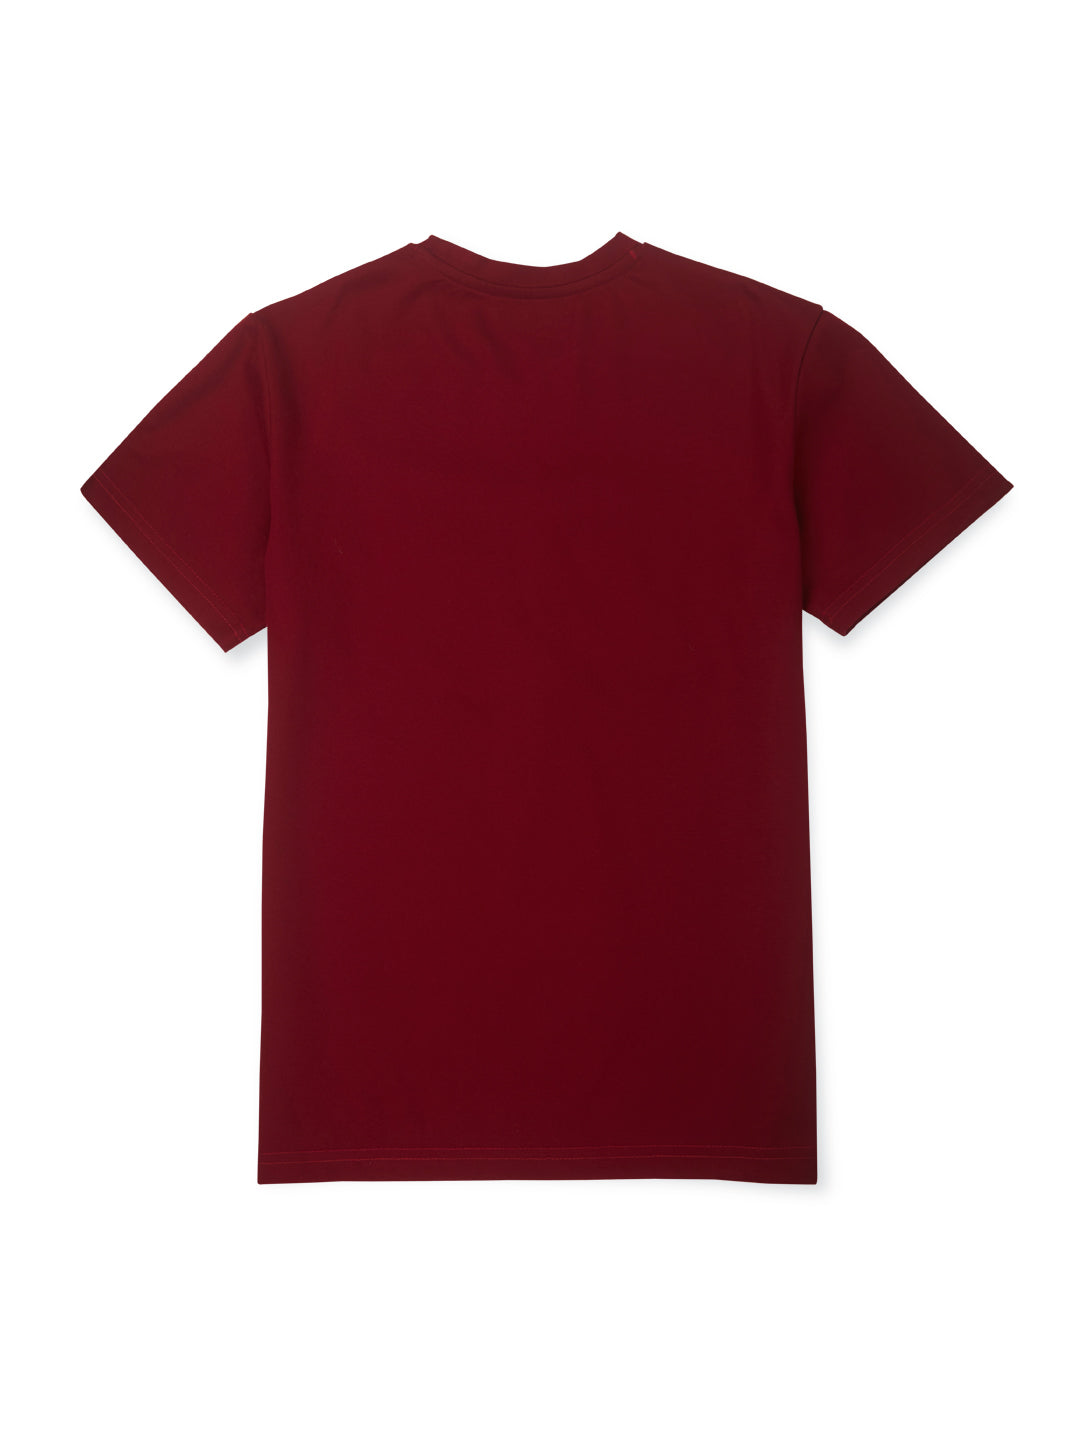 Boys maroon round neck knitted cotton printed t-shirt